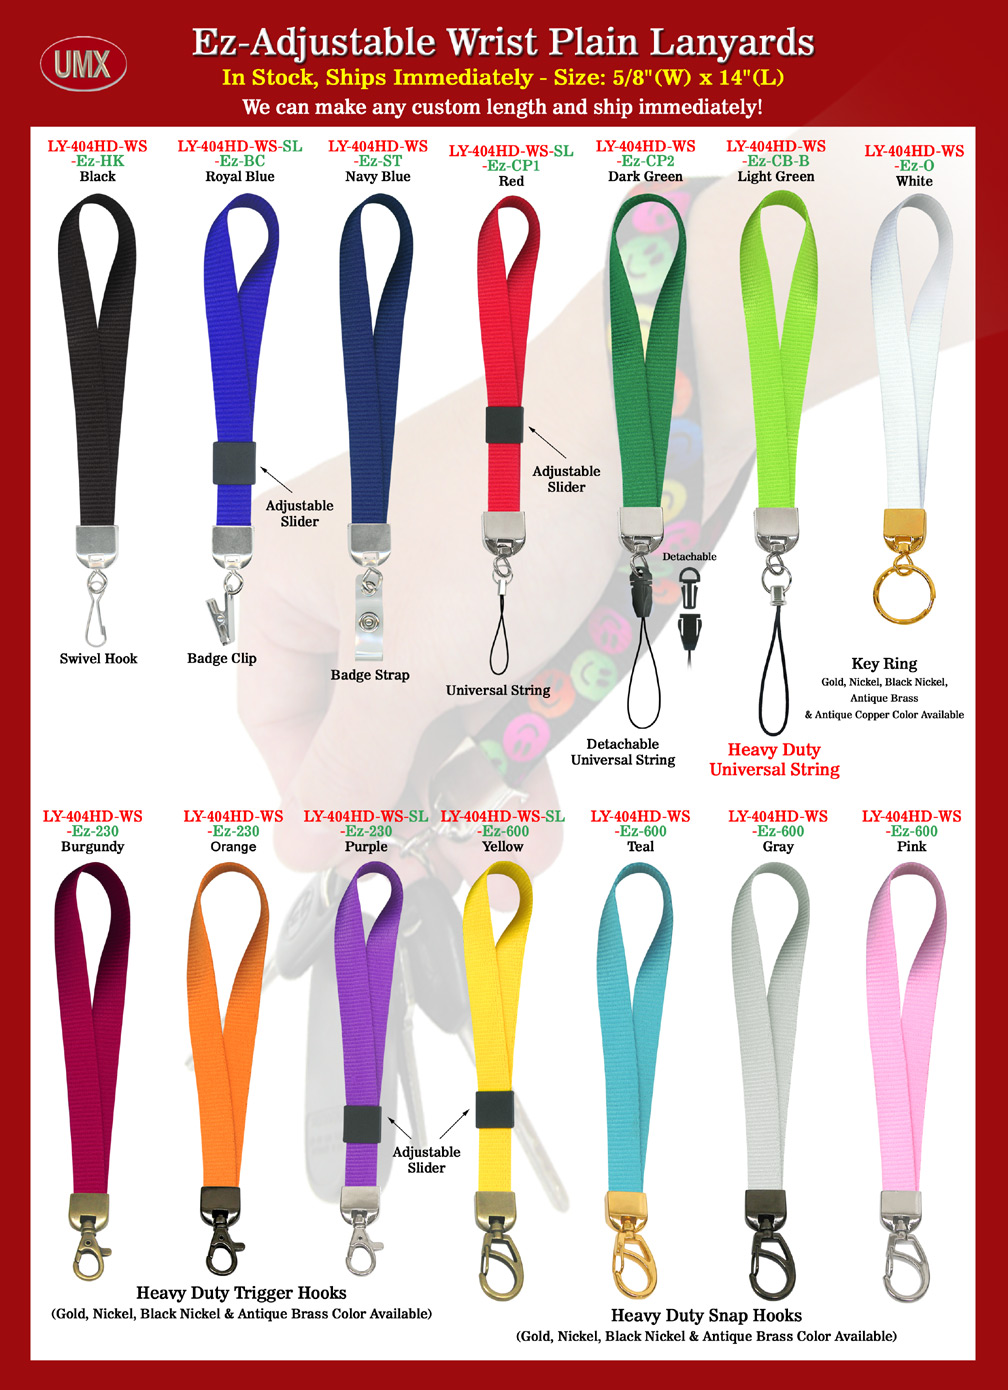 Overall View: Helpful Photo For Wrist Lanyards: 5/8" Ez-Adjustable Heavy Duty Plain Color Models With Adjustable Length Capability  Buyer